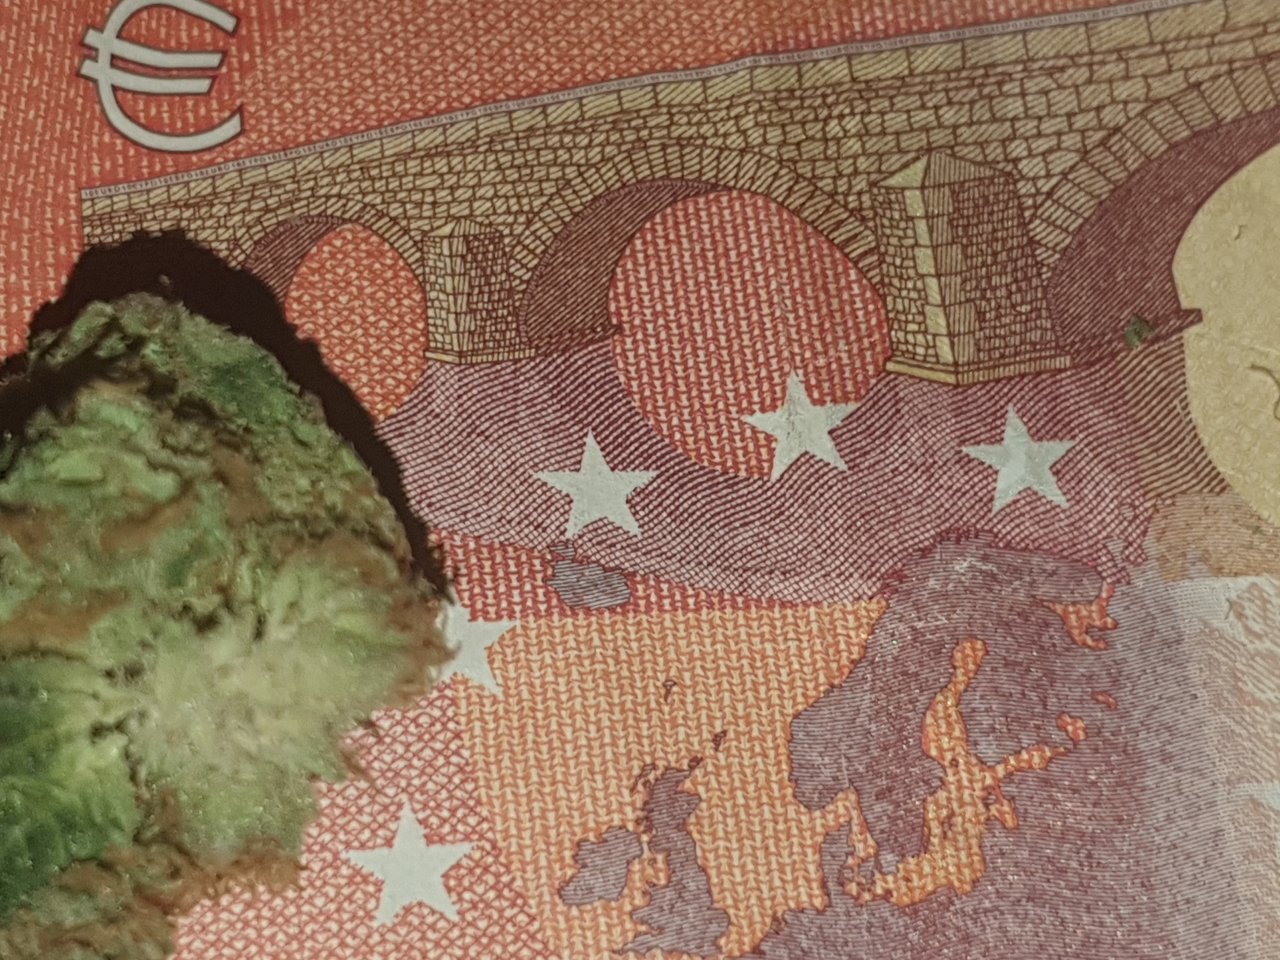 weed and 10 euro as background to make everything even more beautiful 😋🙌